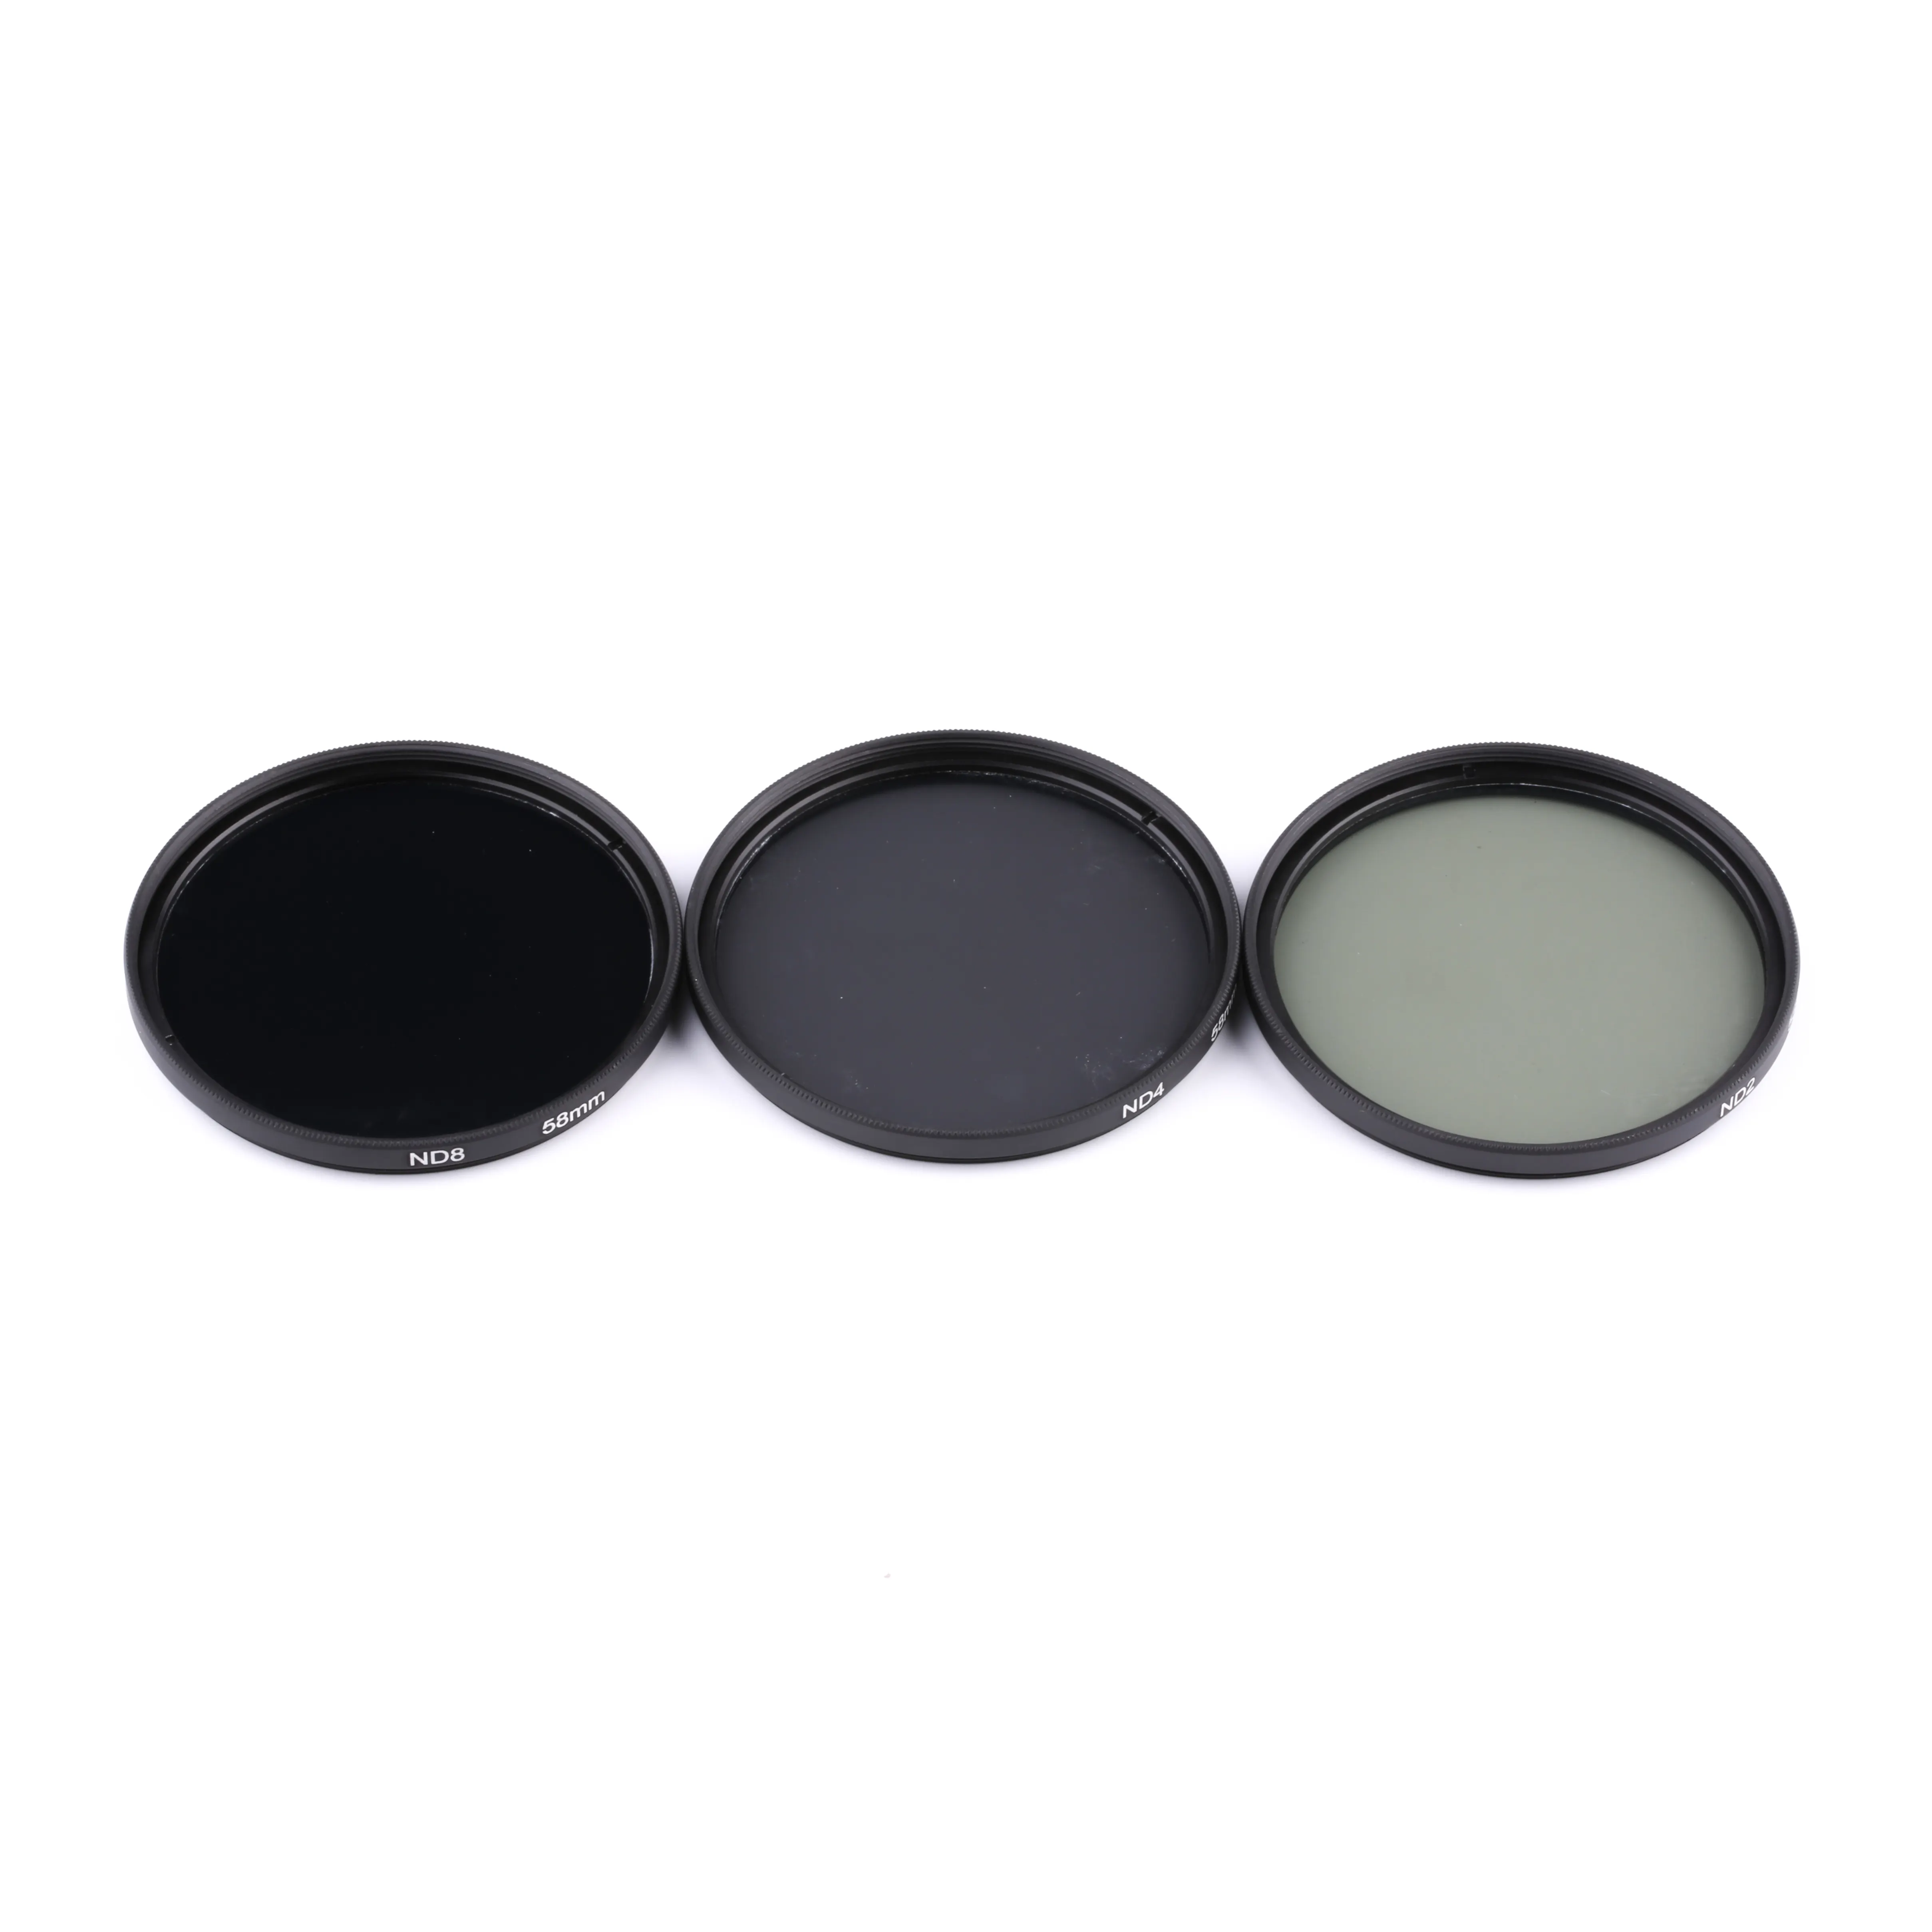 BAODELI Variable Nd Filter Nd2-400 49 52 55 58 62 67 72 77 82 mm For Camera Lens Canon 77d 450d T6 Nikon D3400 Sony Accessories